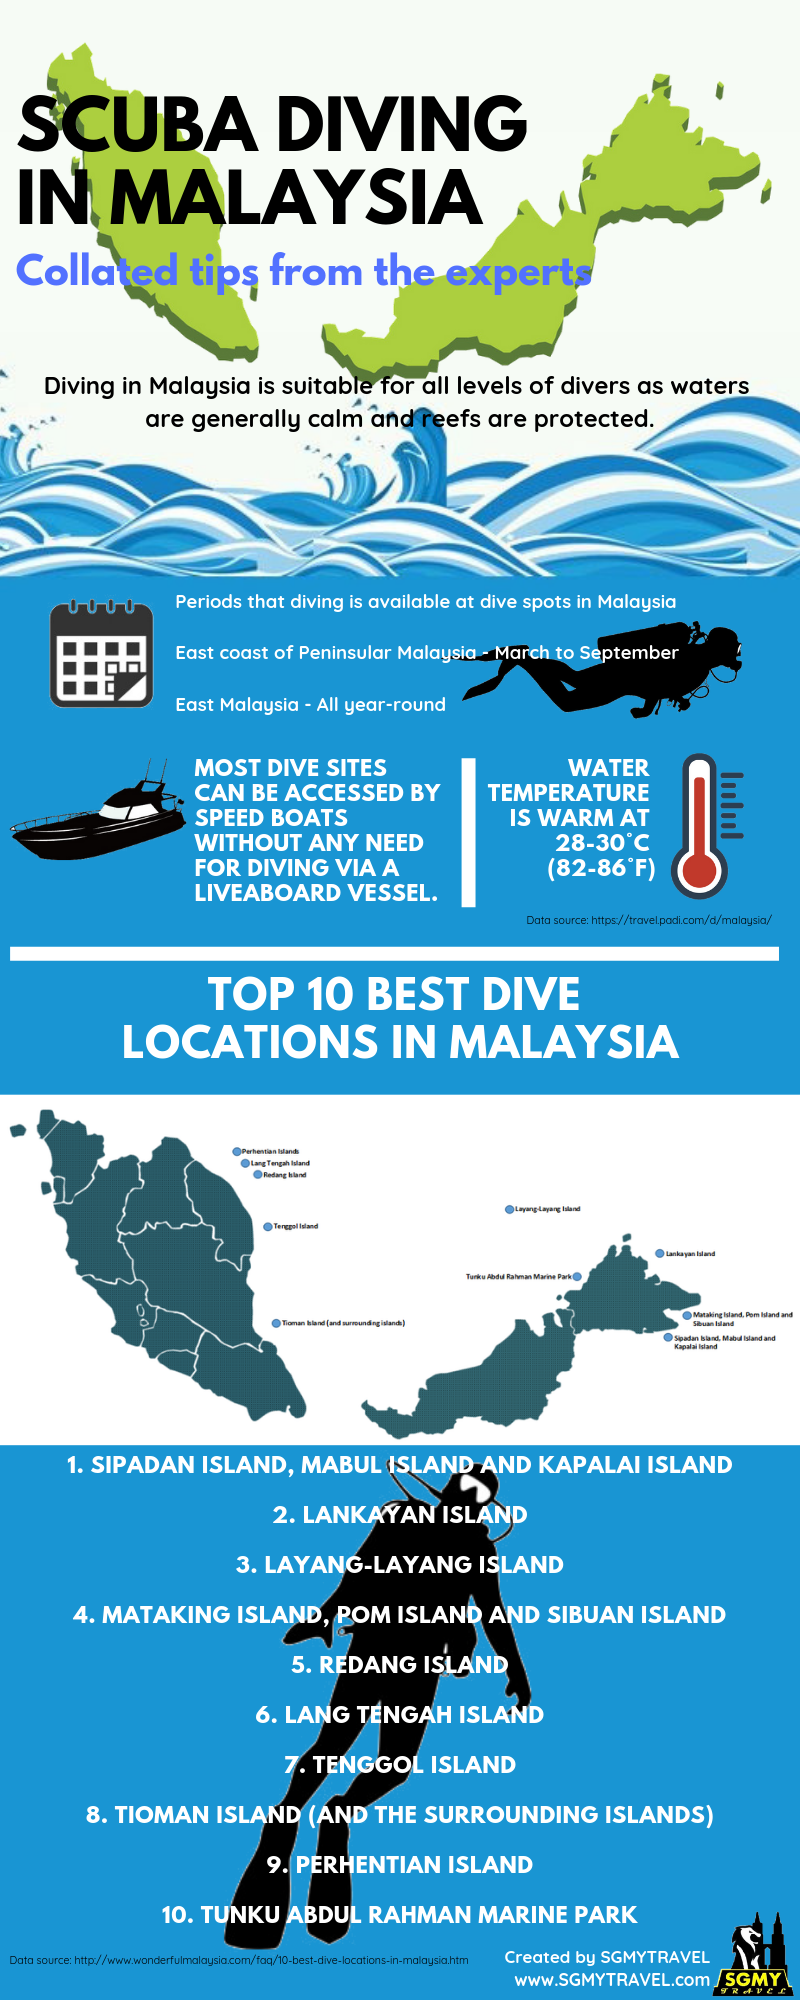 Ultimate guide to scuba diving in Malaysia